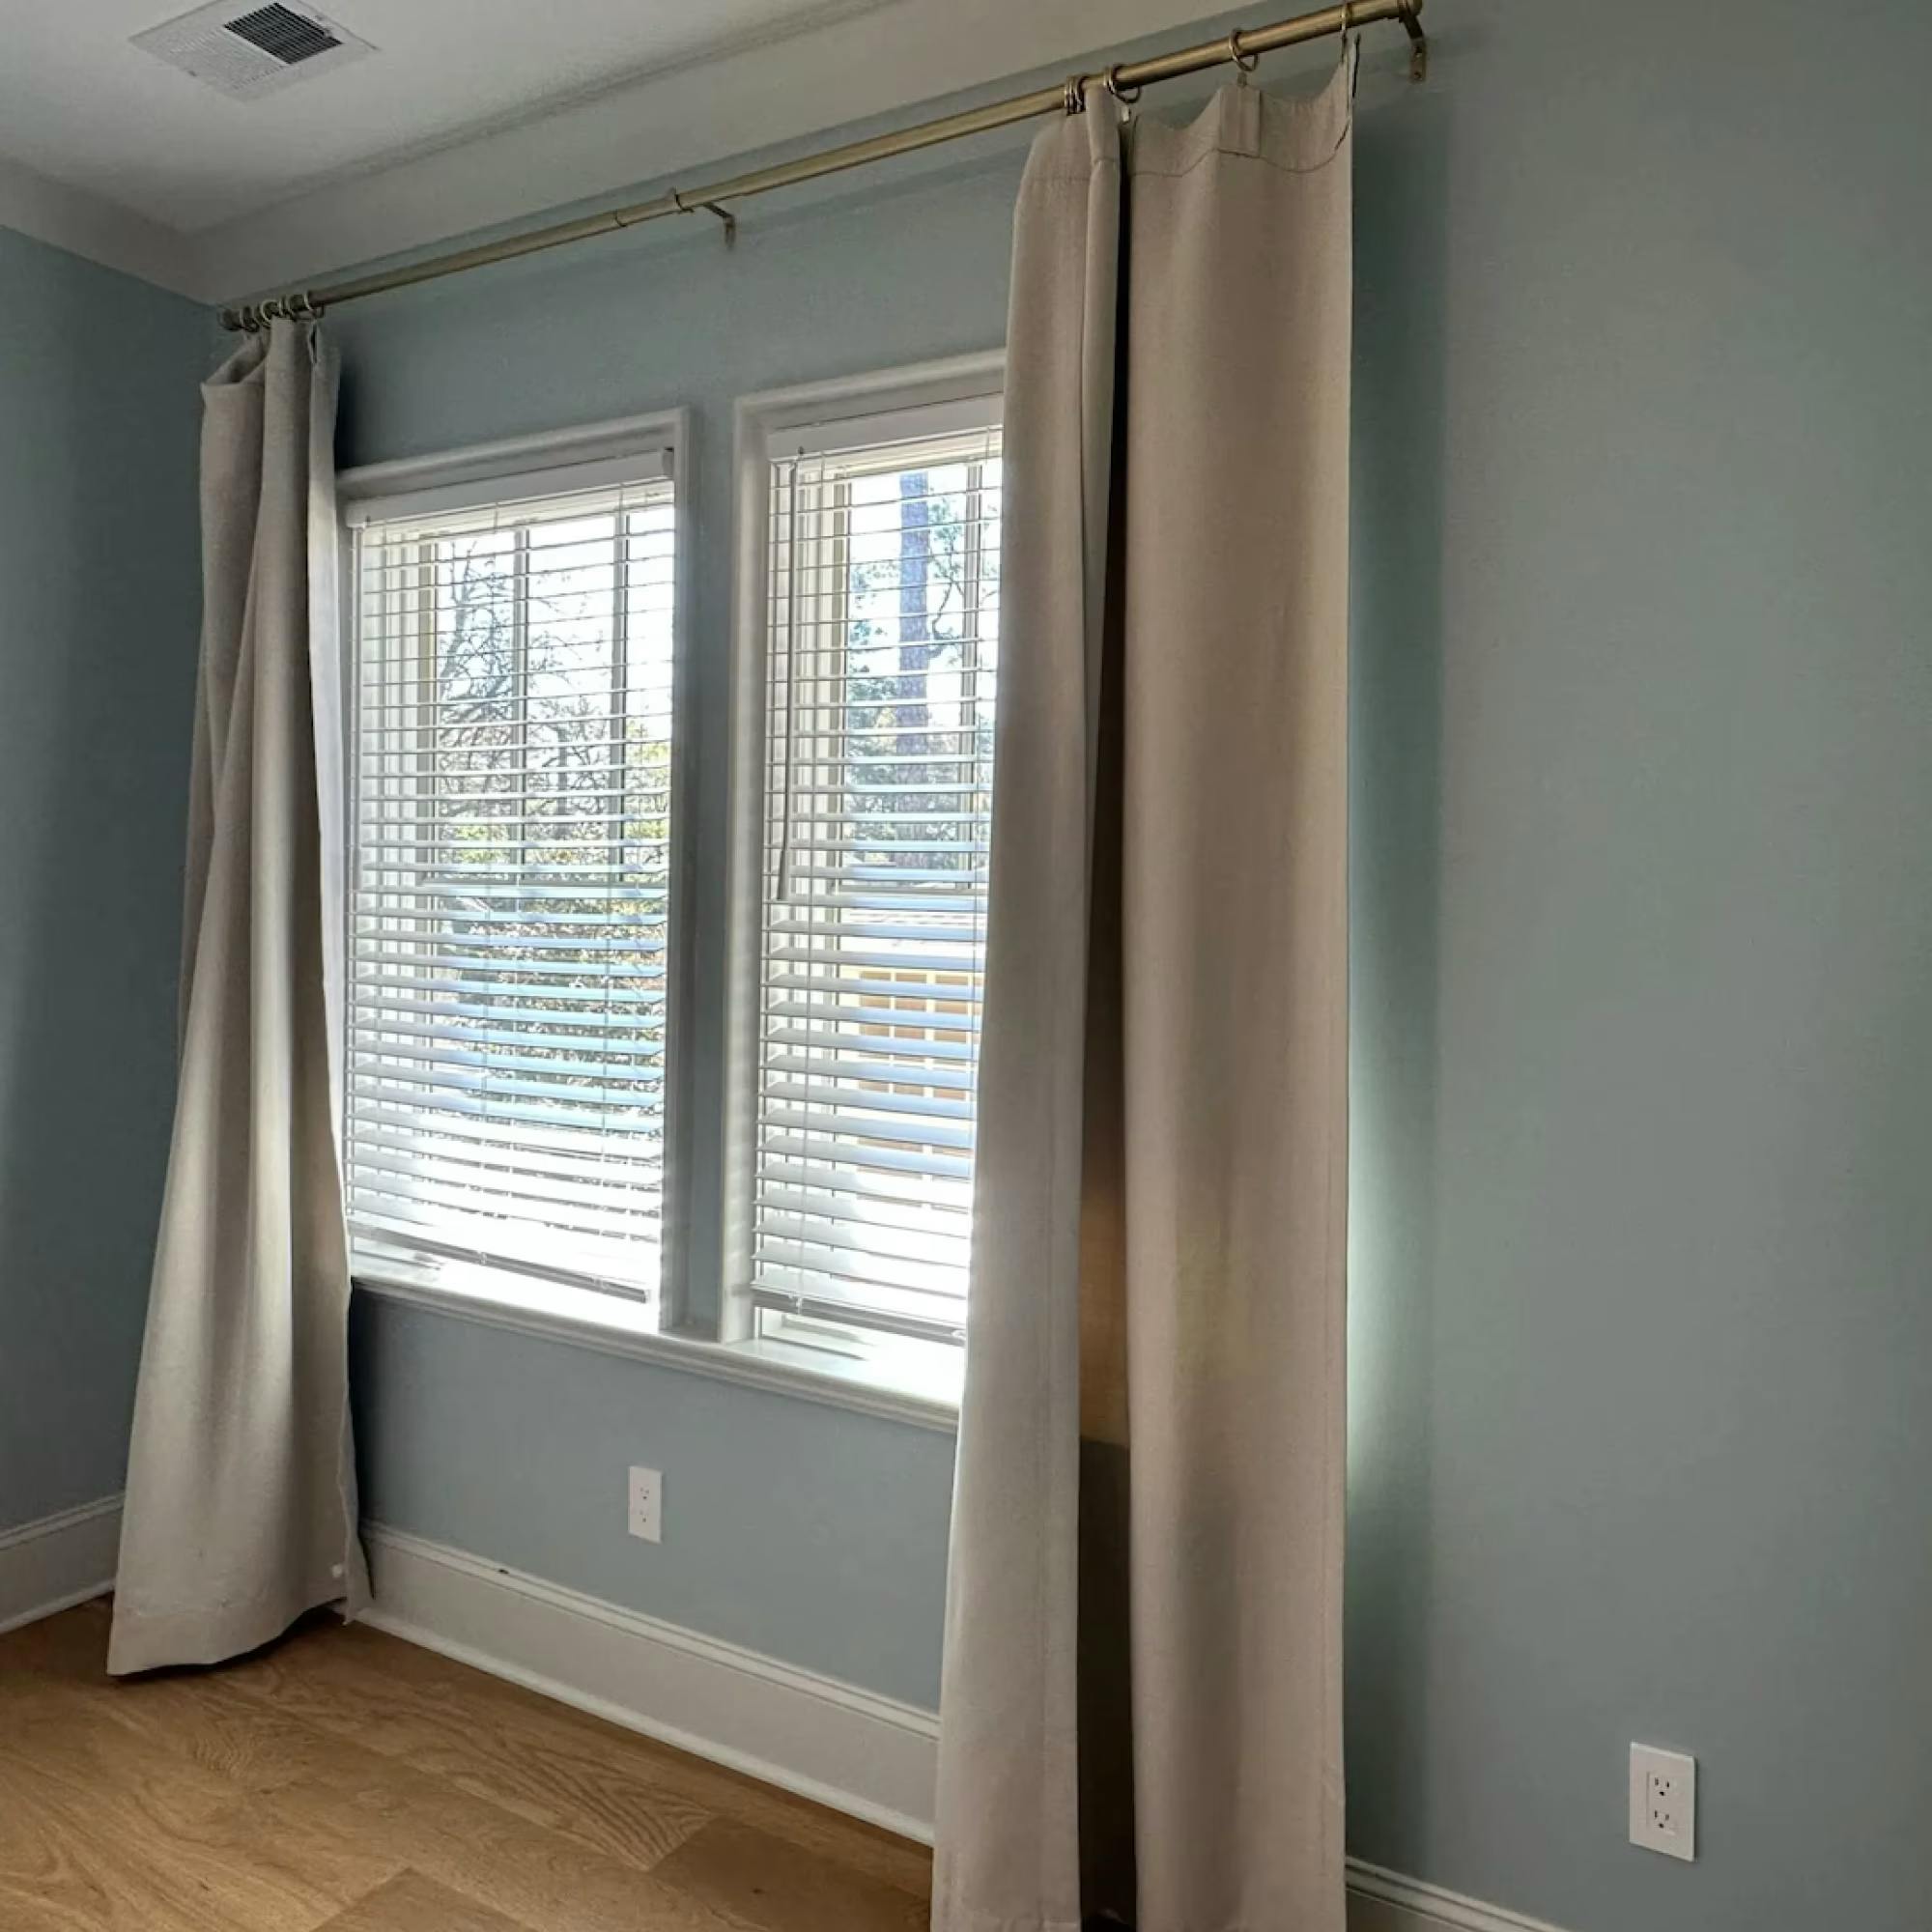 Craftwork painted a second bedroom in Plaza Midwood Sherwin-William’s Tradewind (SW 6218).